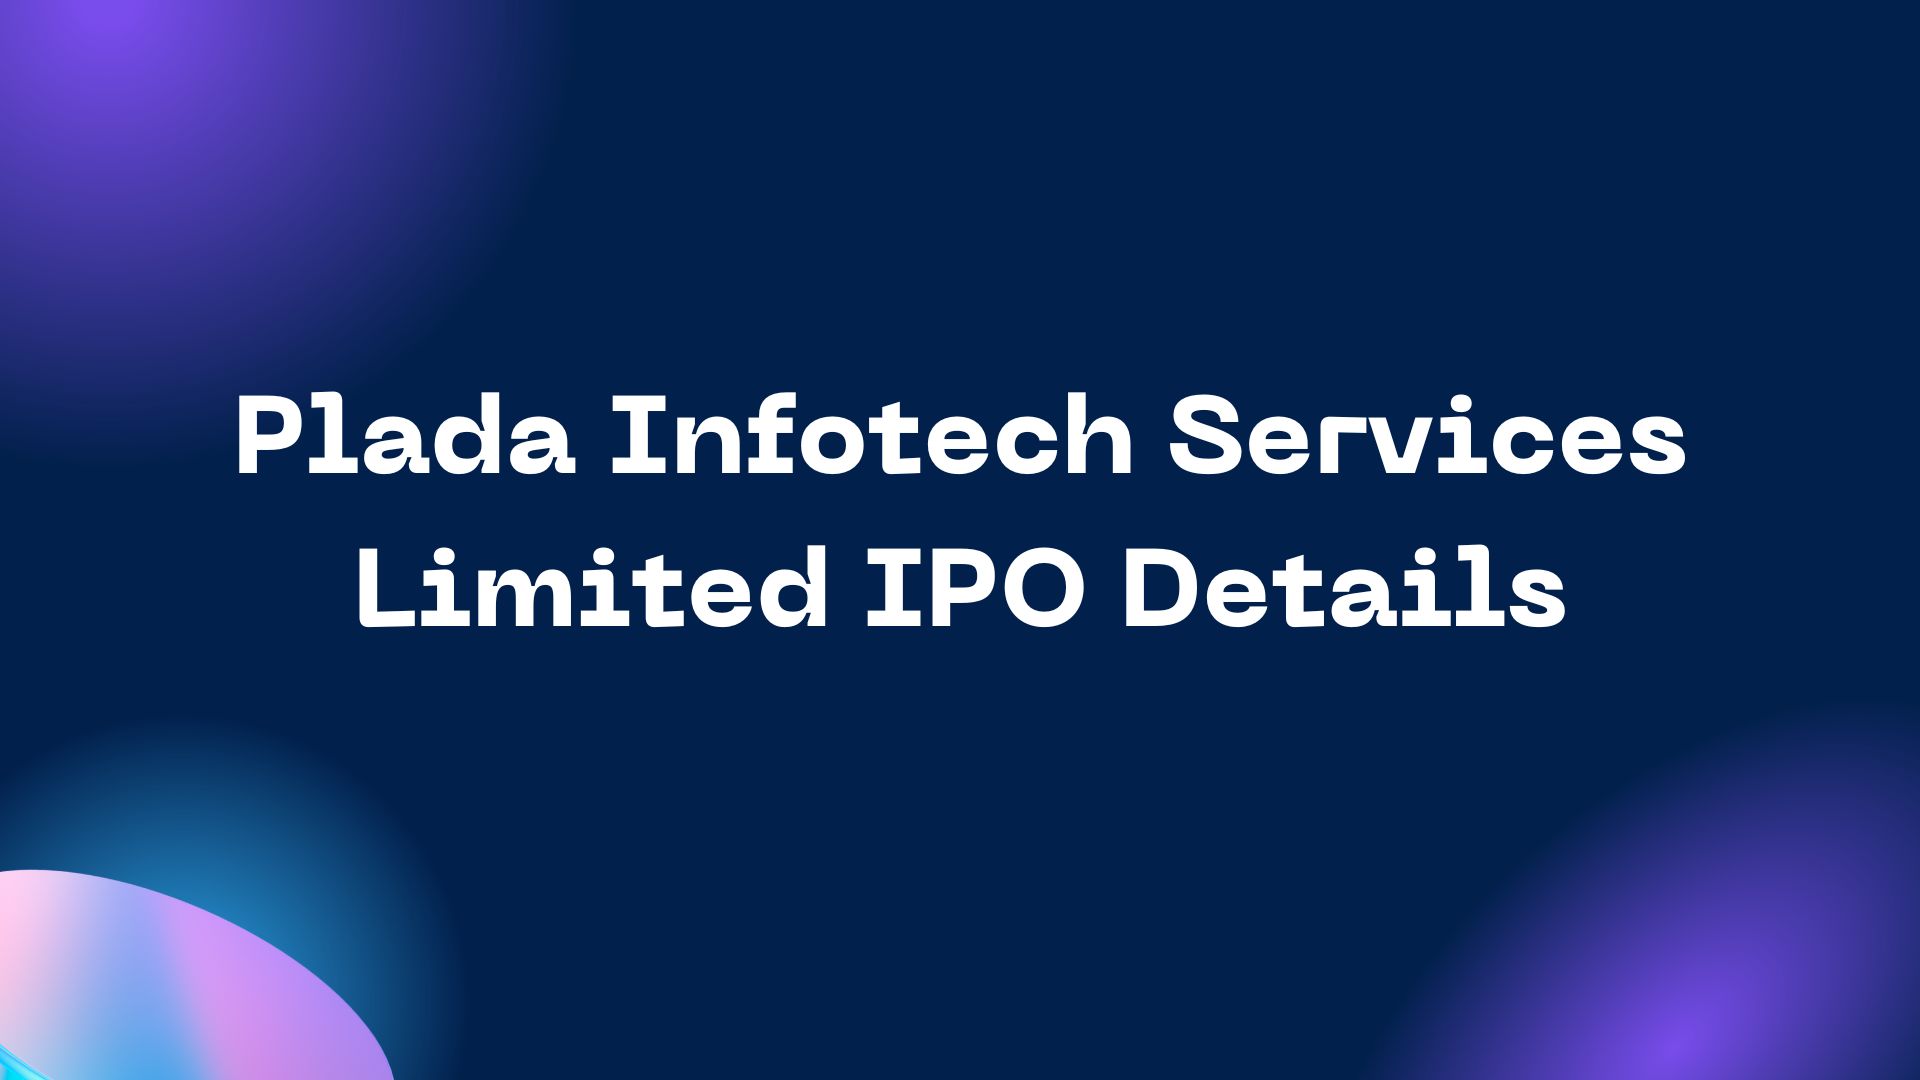 Plada Infotech Services Limited IPO Details